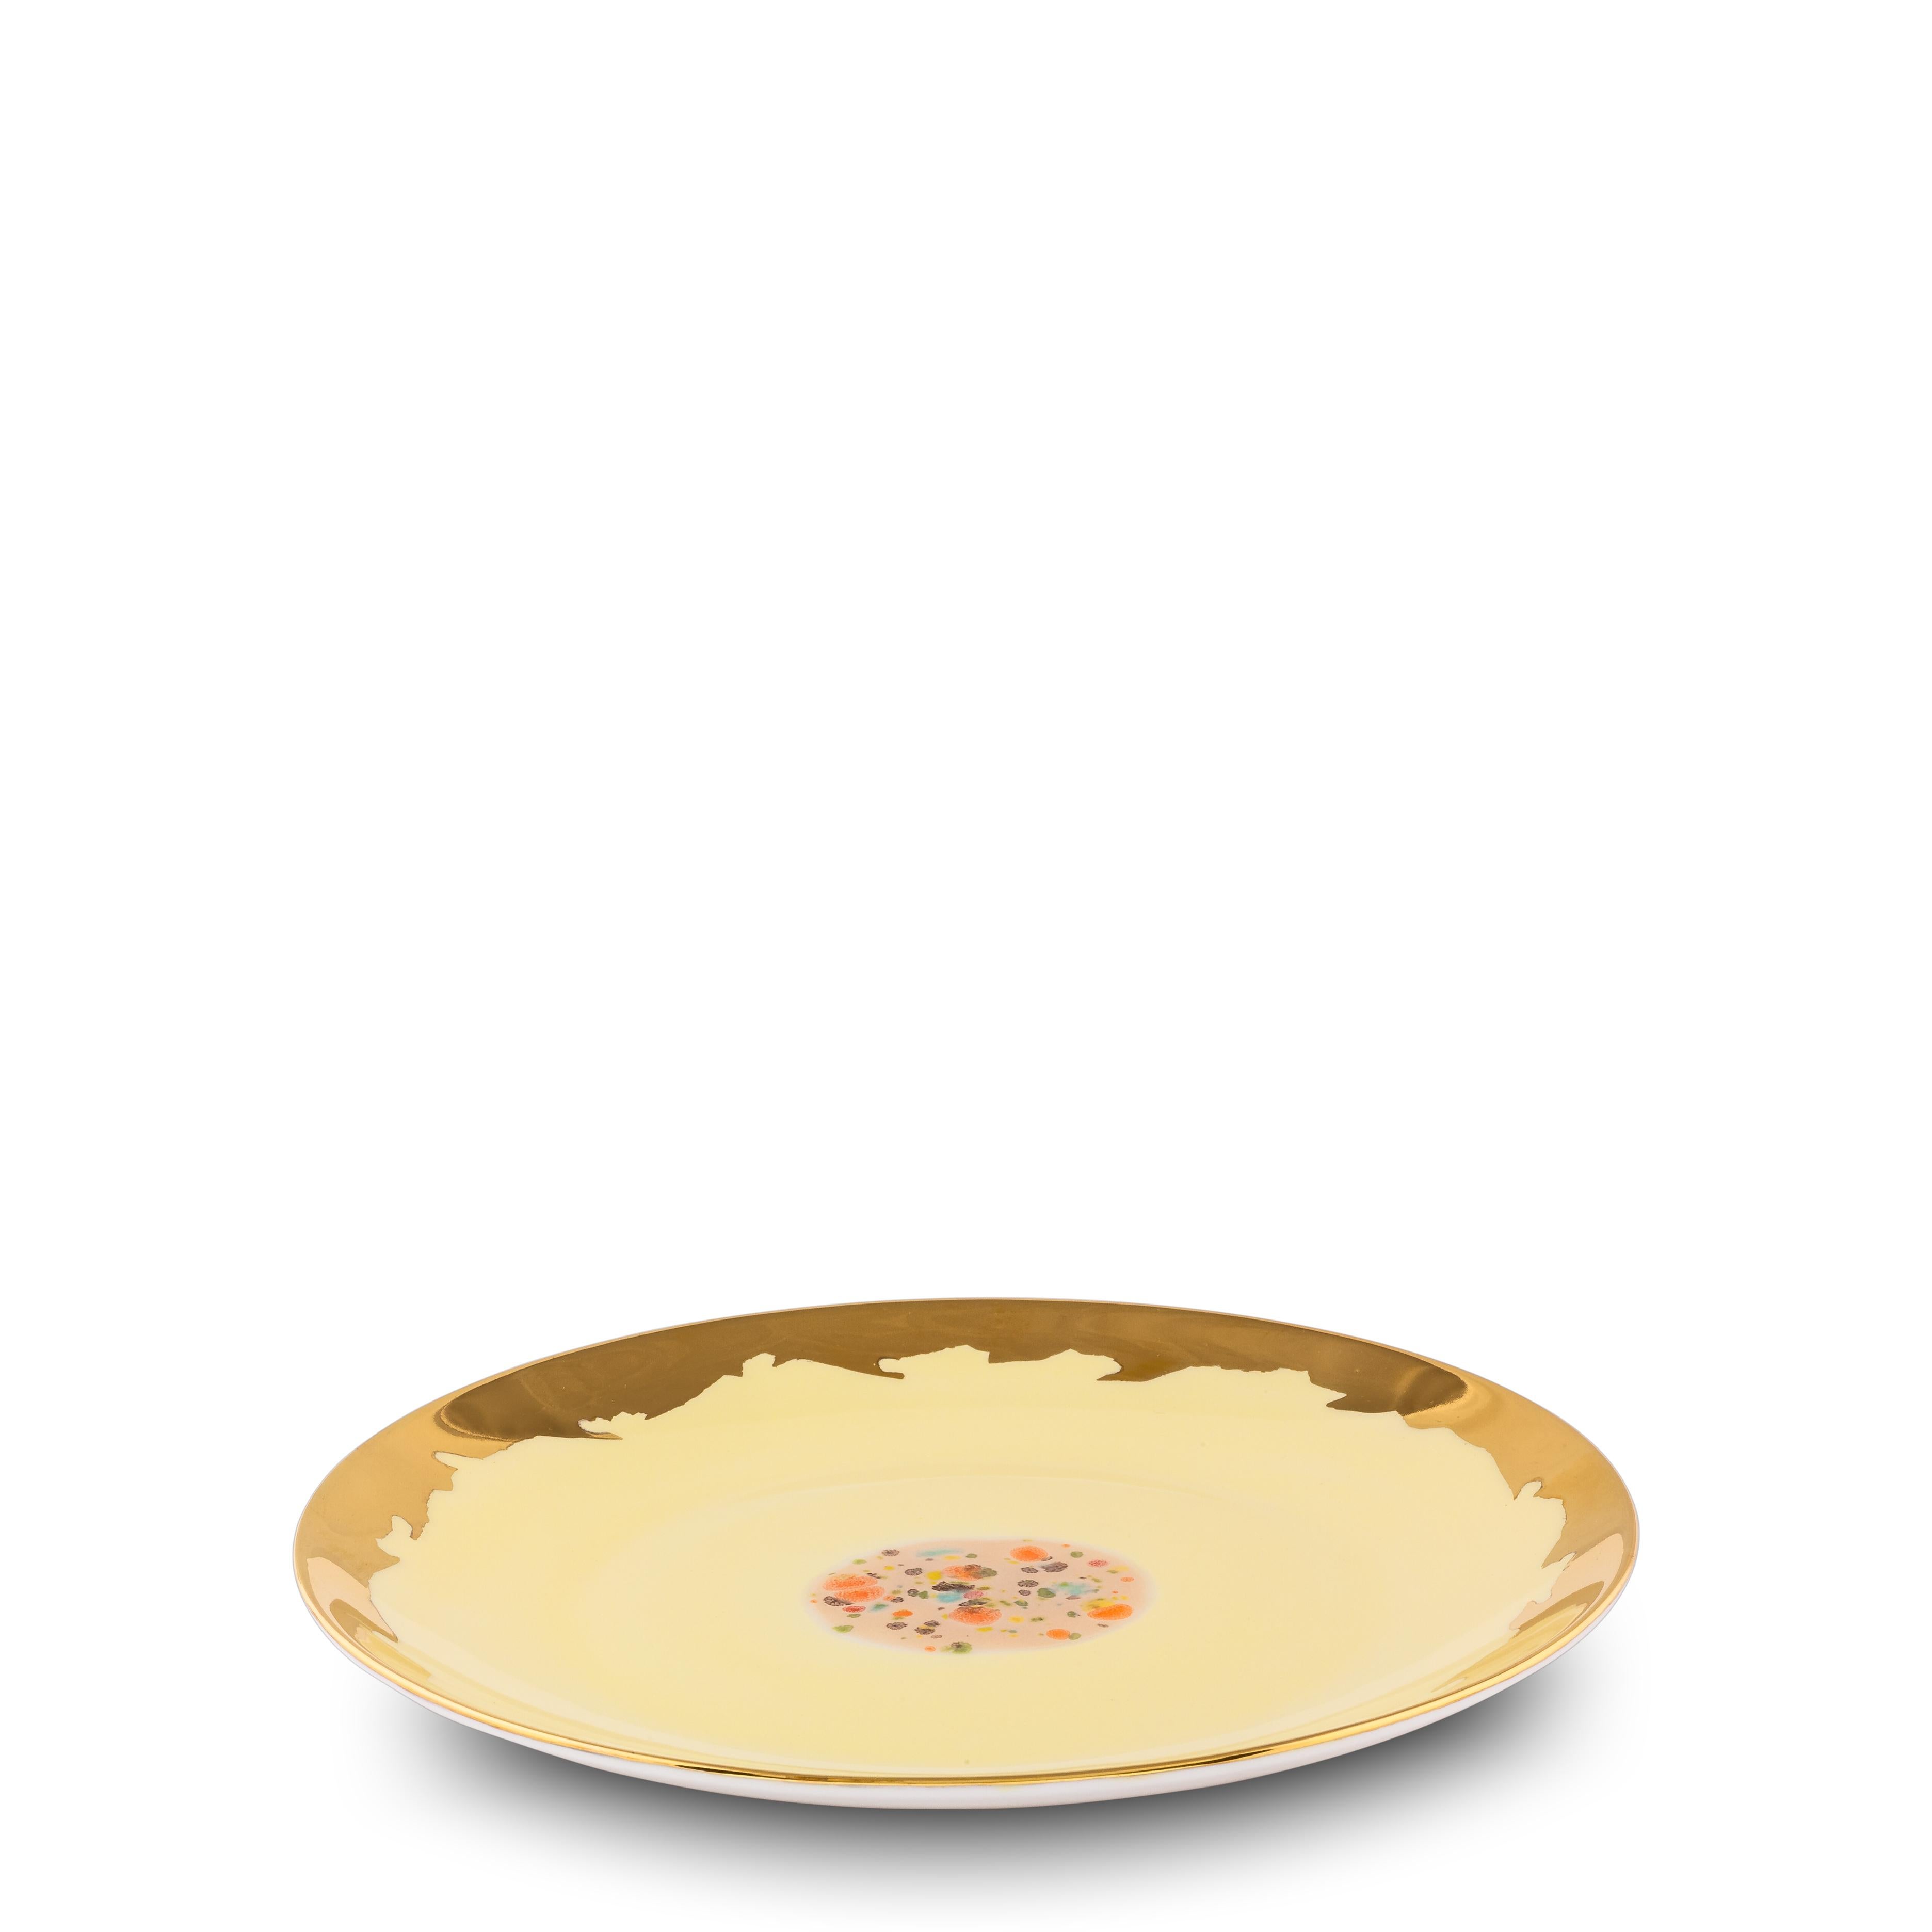 Handcrafted in Italy from the finest porcelain, these sand drop edge dessert coupe plates from the Chestnut collection have an original golden drop edge decoration emphasizing the brilliant yellow glaze.

Set of 2 white drop edge dessert coupe